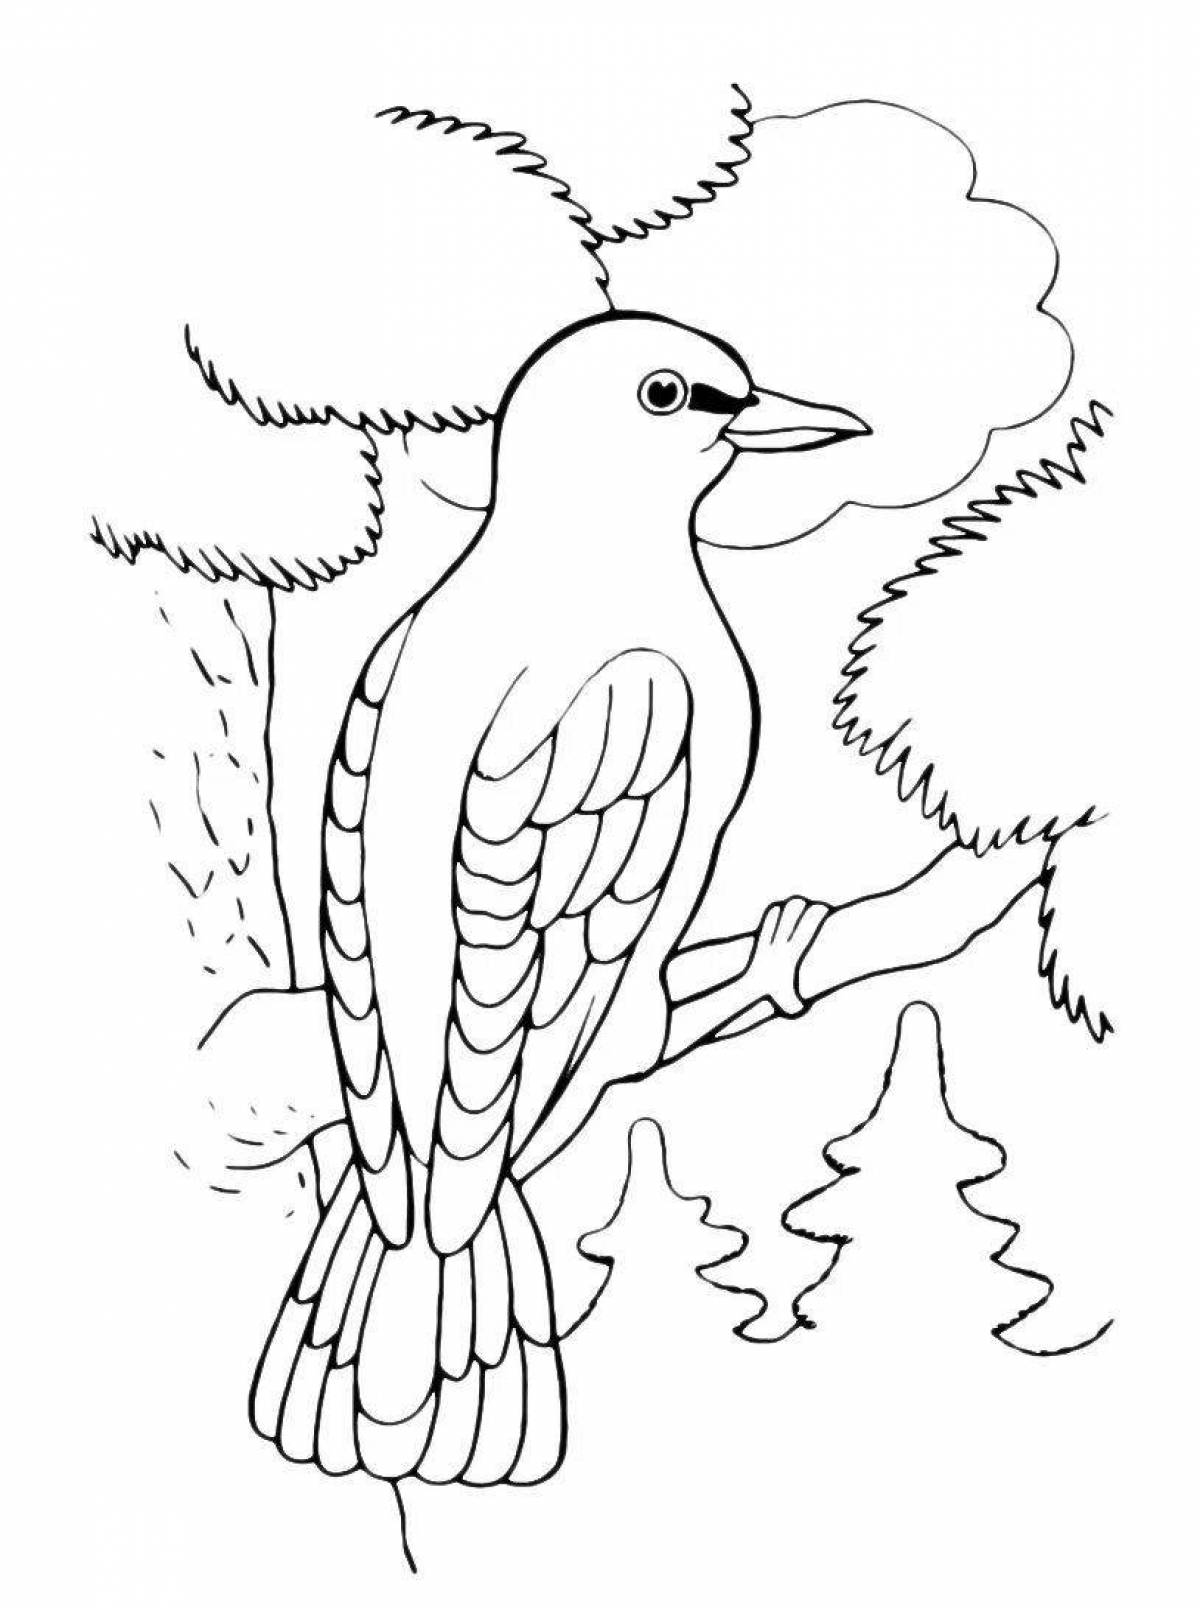 Incredible bird coloring book for 5-6 year olds